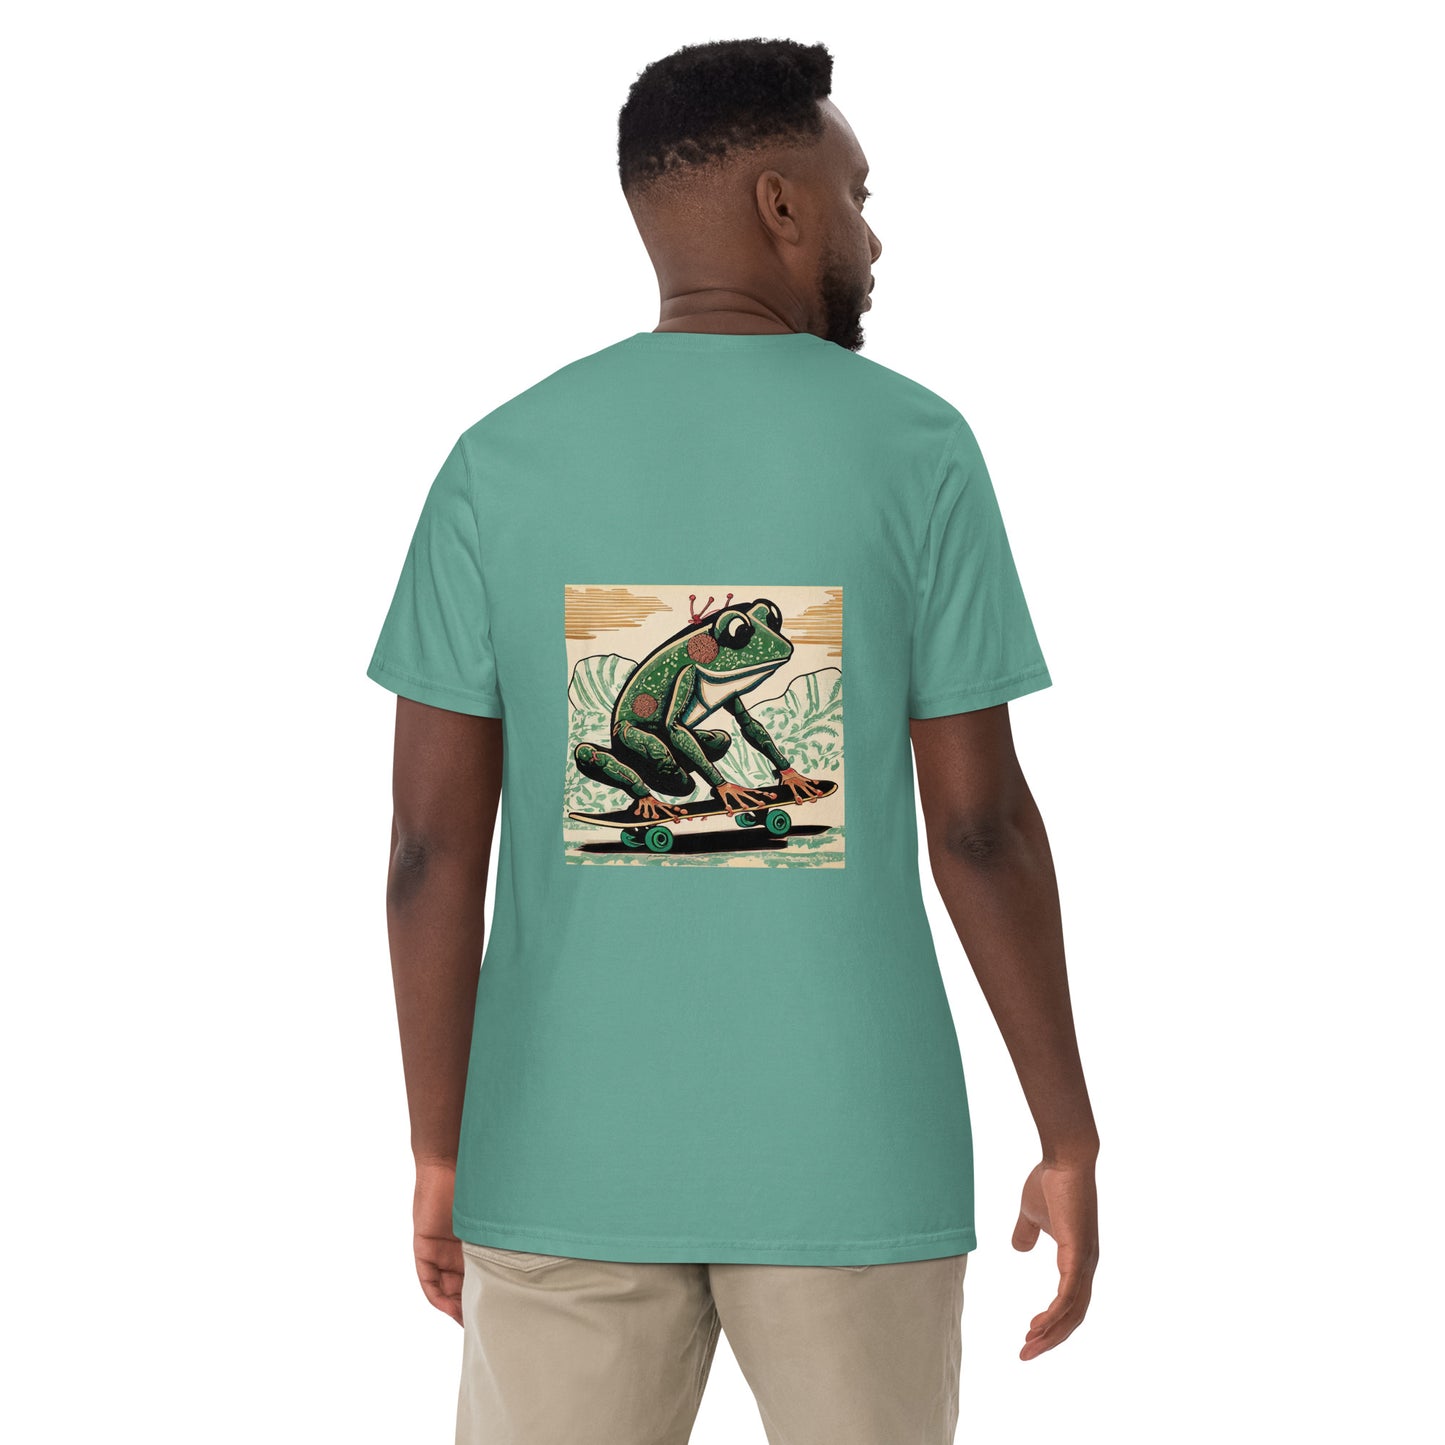 Frog Skateboarding (Woodblock Printing Style) Unisex Garment-Dyed Heavyweight Y-shirt by tokyozoodesign